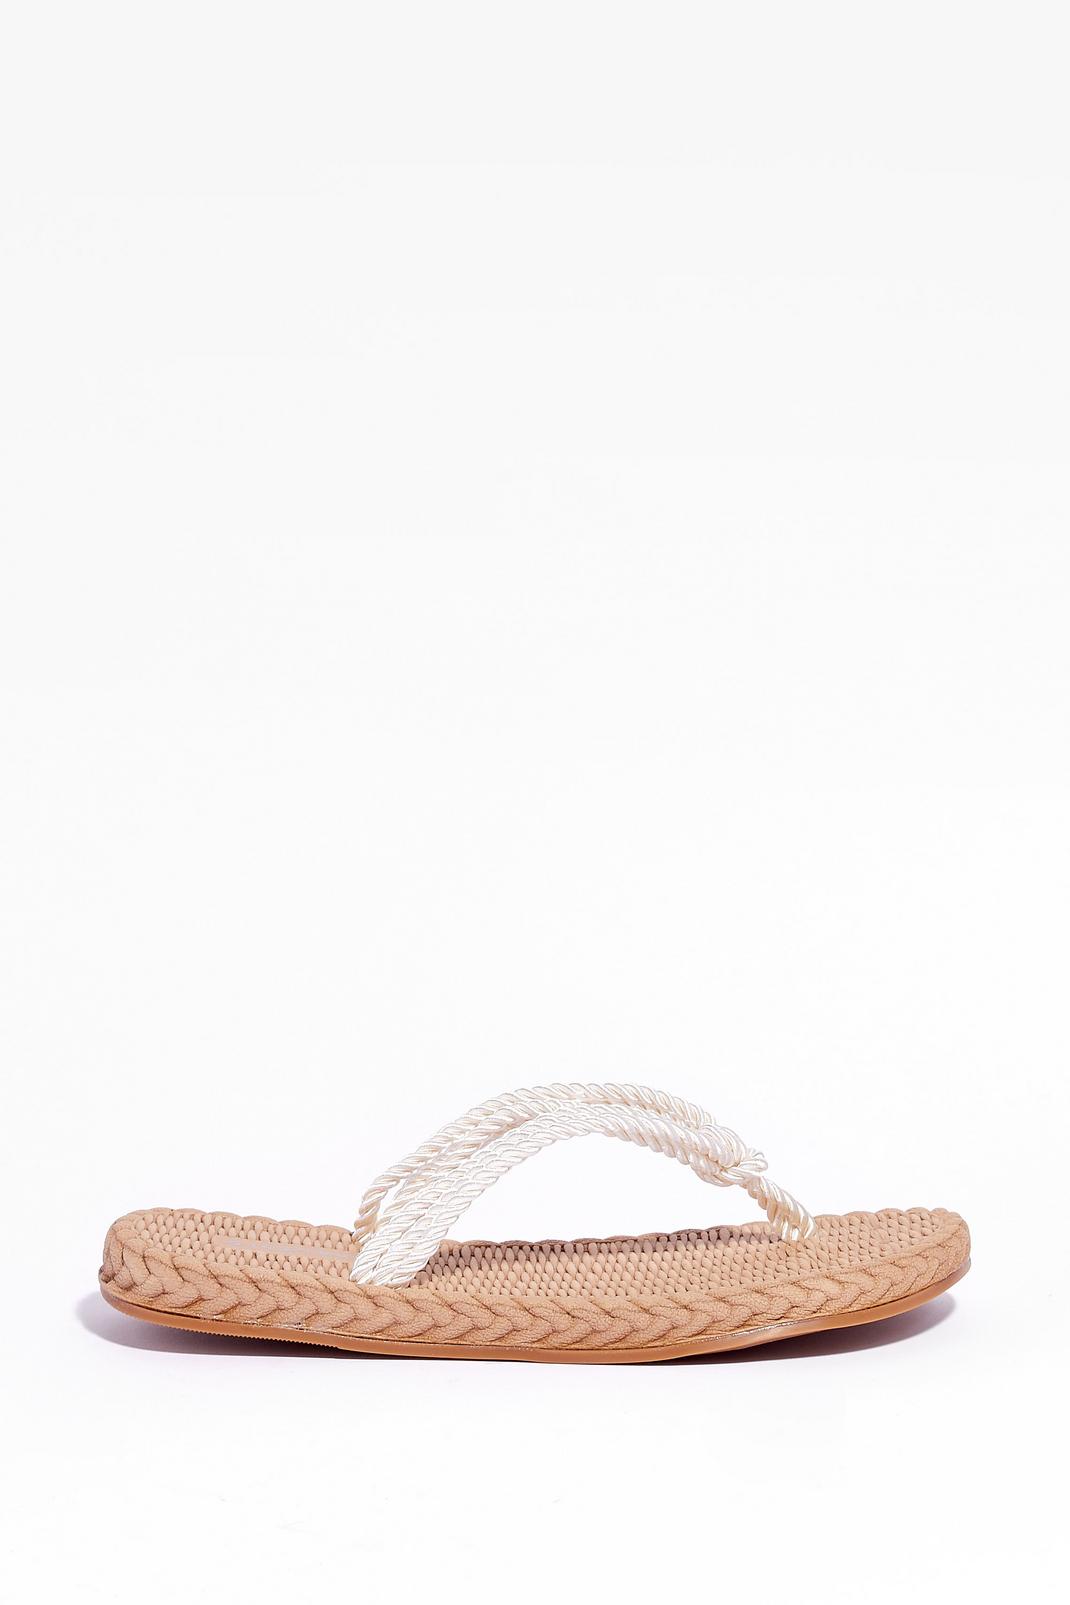 Woven Rope Flat Sandals image number 1